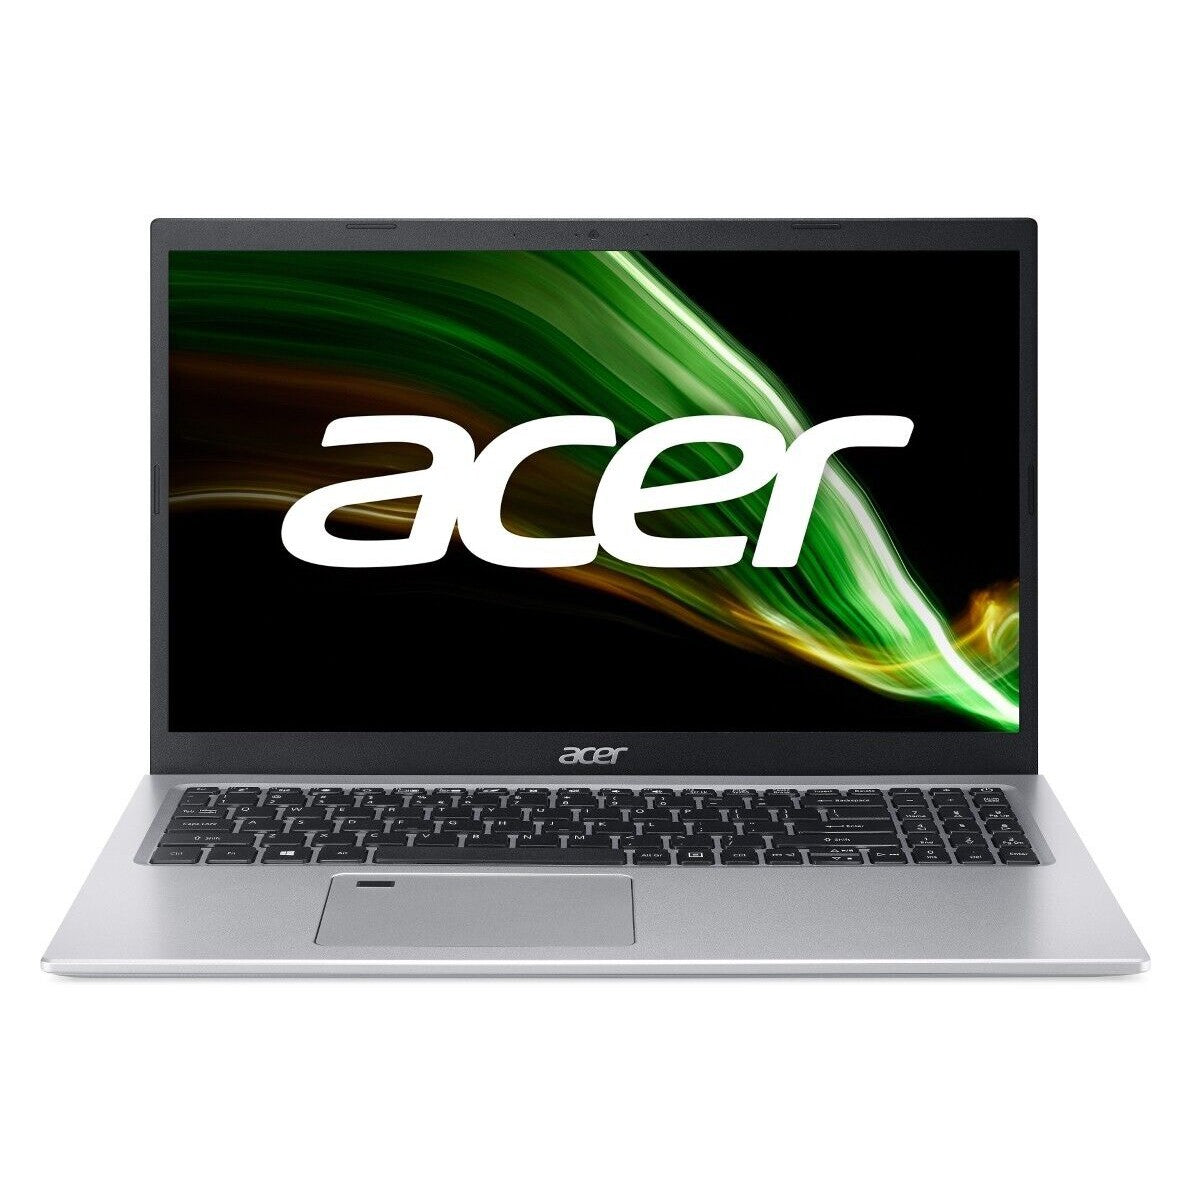 Acer Aspire 5 A51556G 15in Laptop Intel Core i5 8GB Memory 512GB Storage MX450